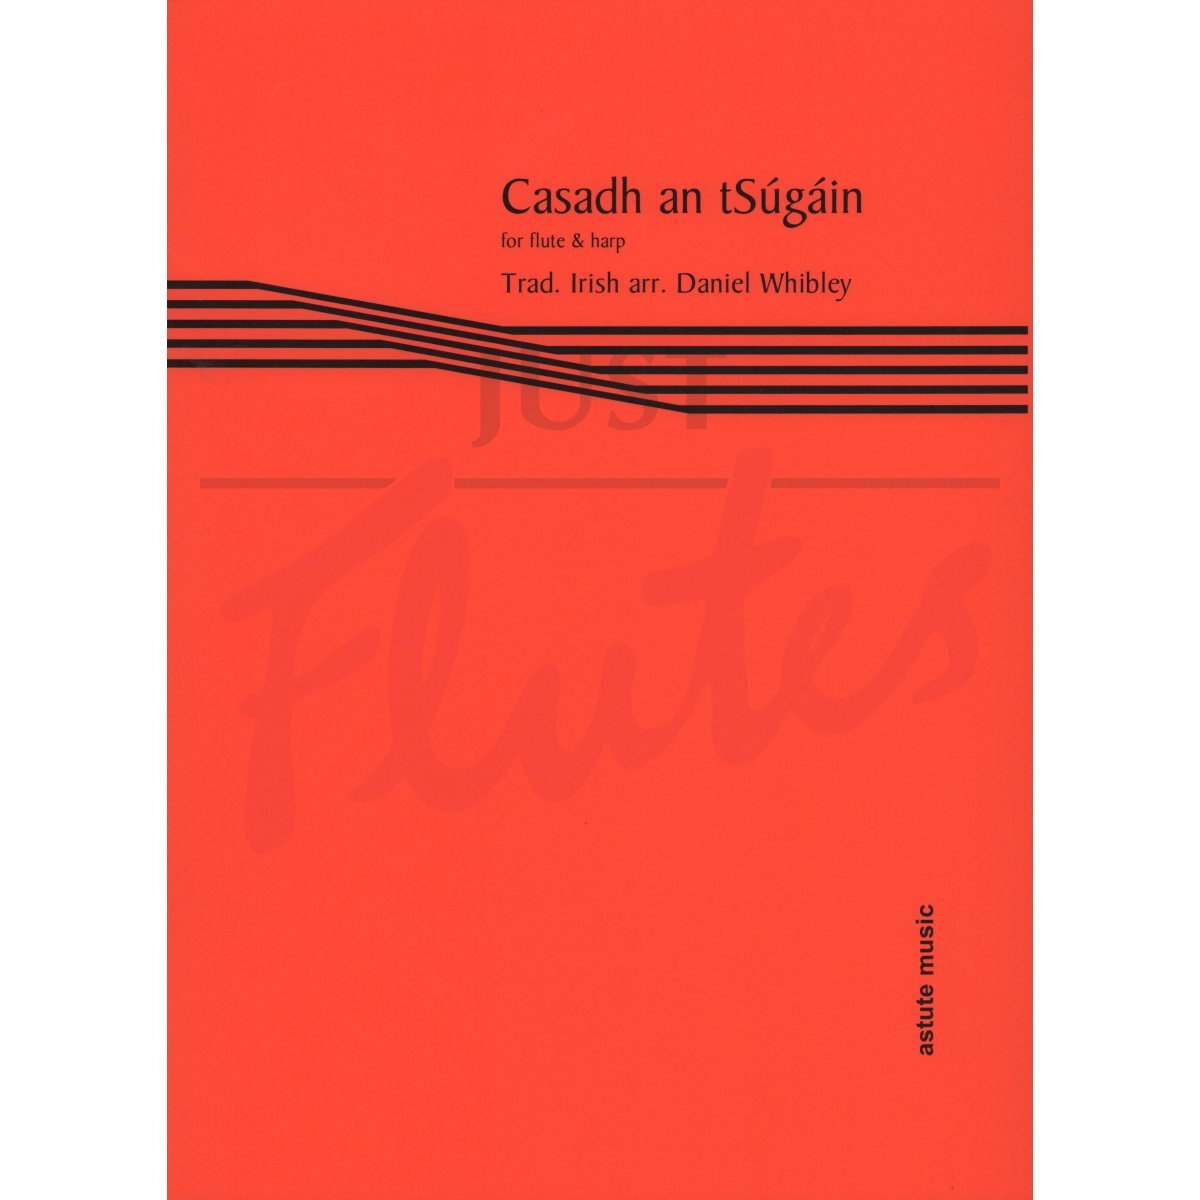 Casadh an tSugain (The Twisting of the Rope) for Flute and Harp